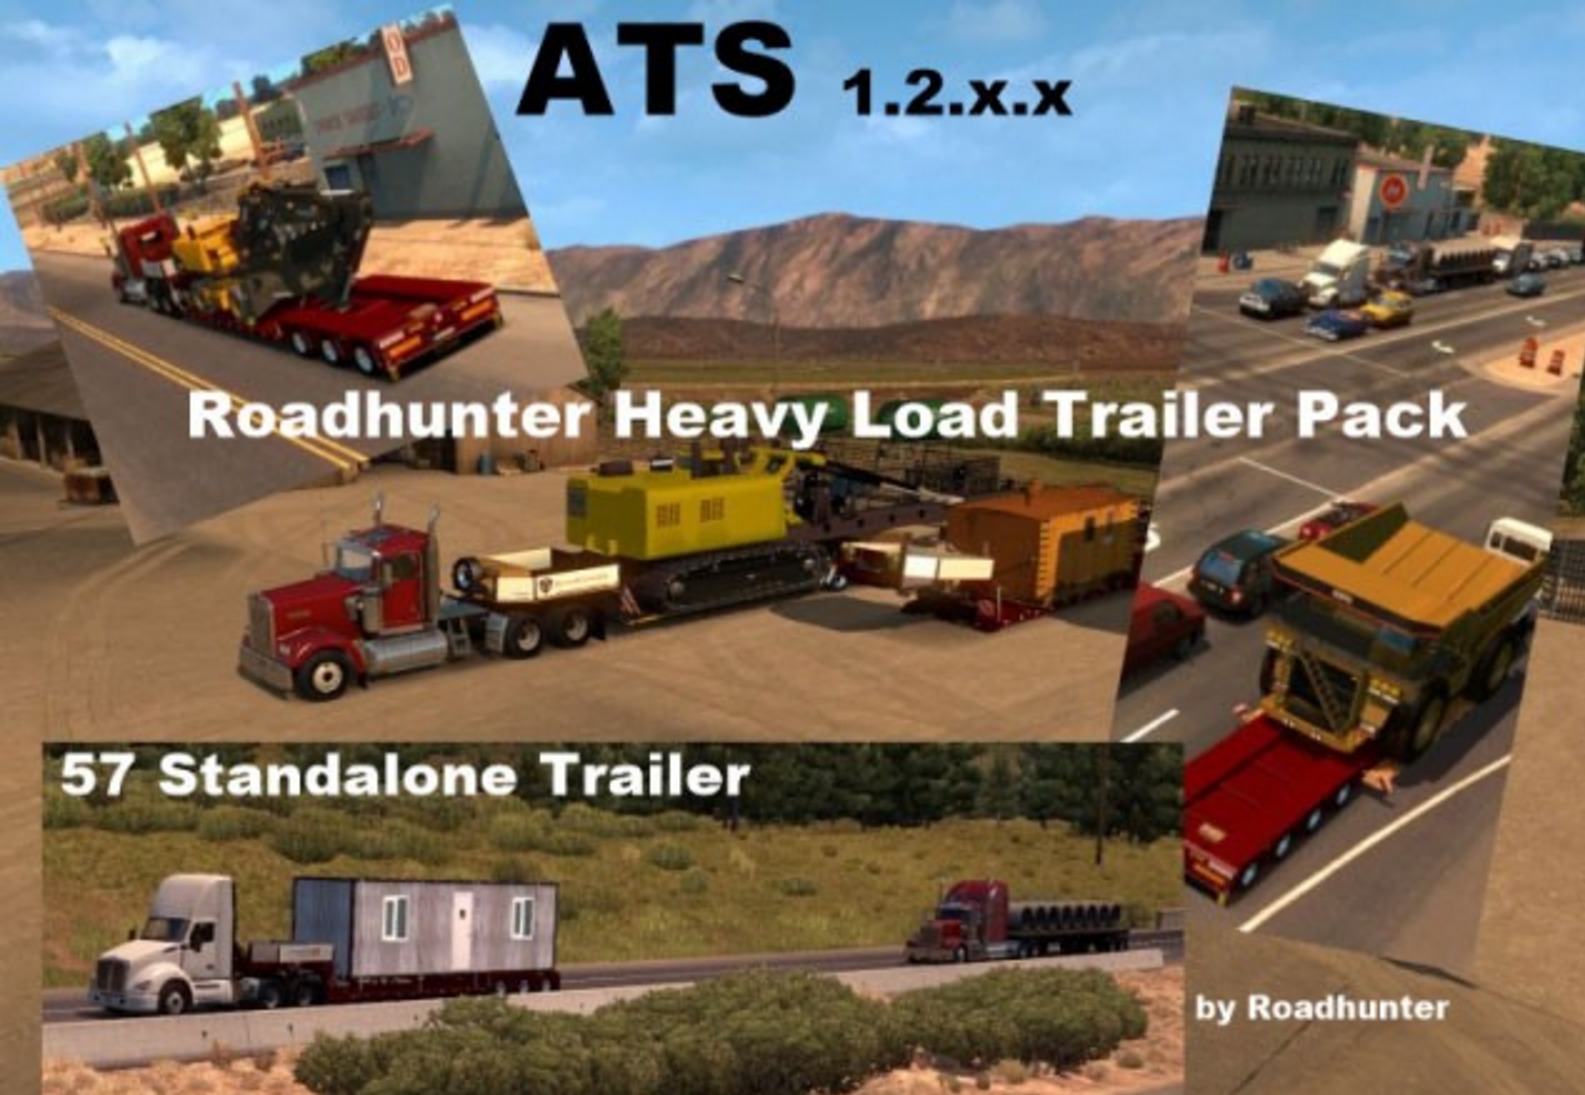 Roadhunter 57 Overweight Trailers Pack v 2.0